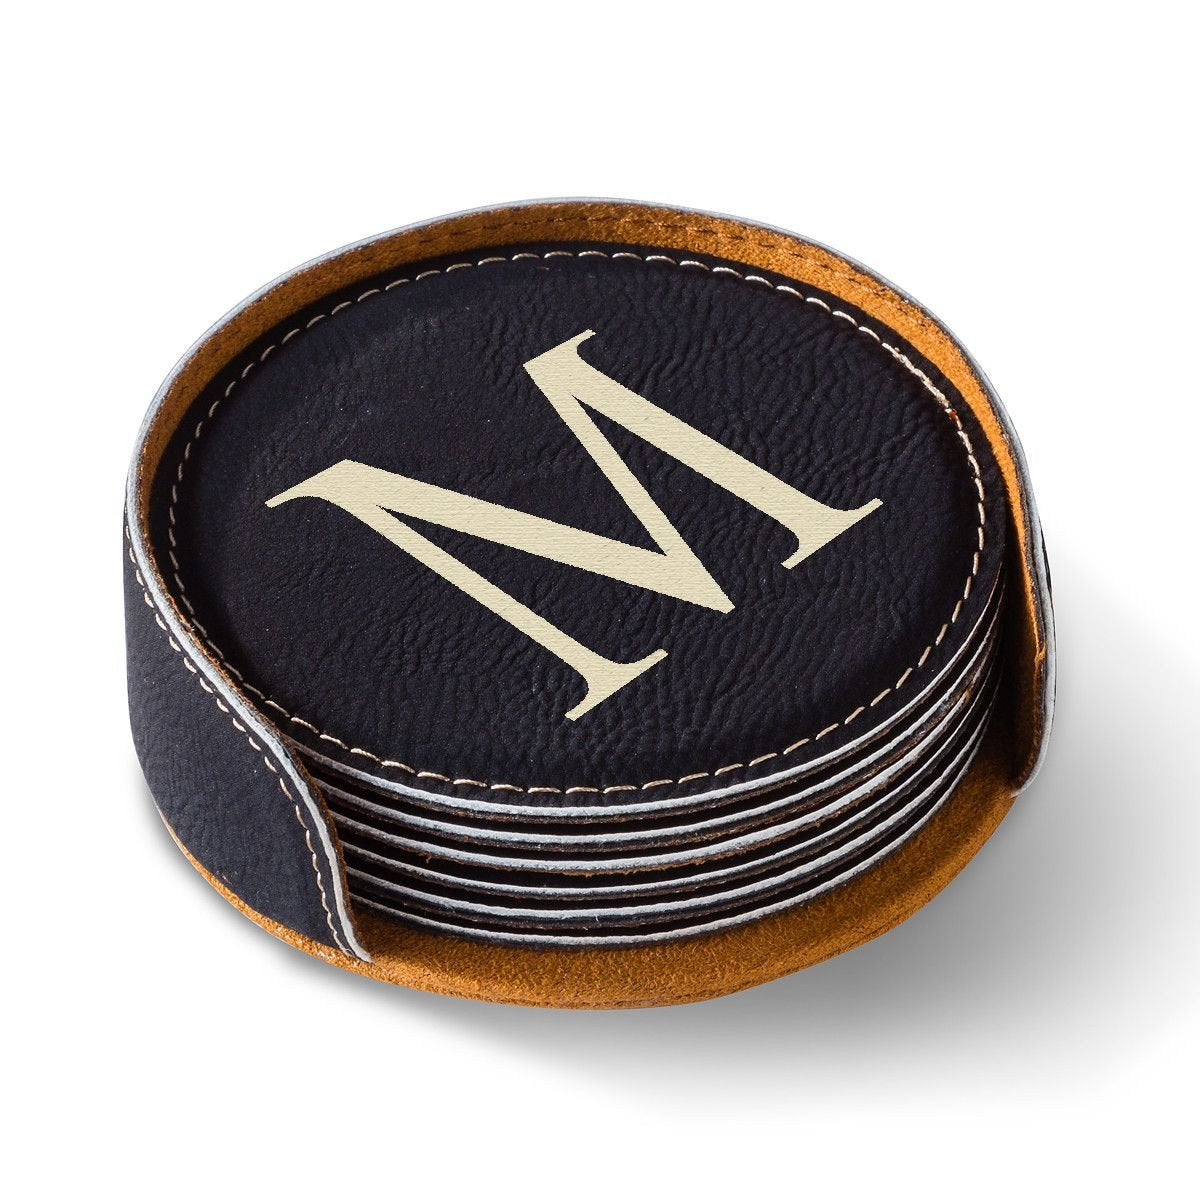 Personalized Round Leatherette Coaster Set - Available in Black, Dark Brown, Light Brown, and Rawhide